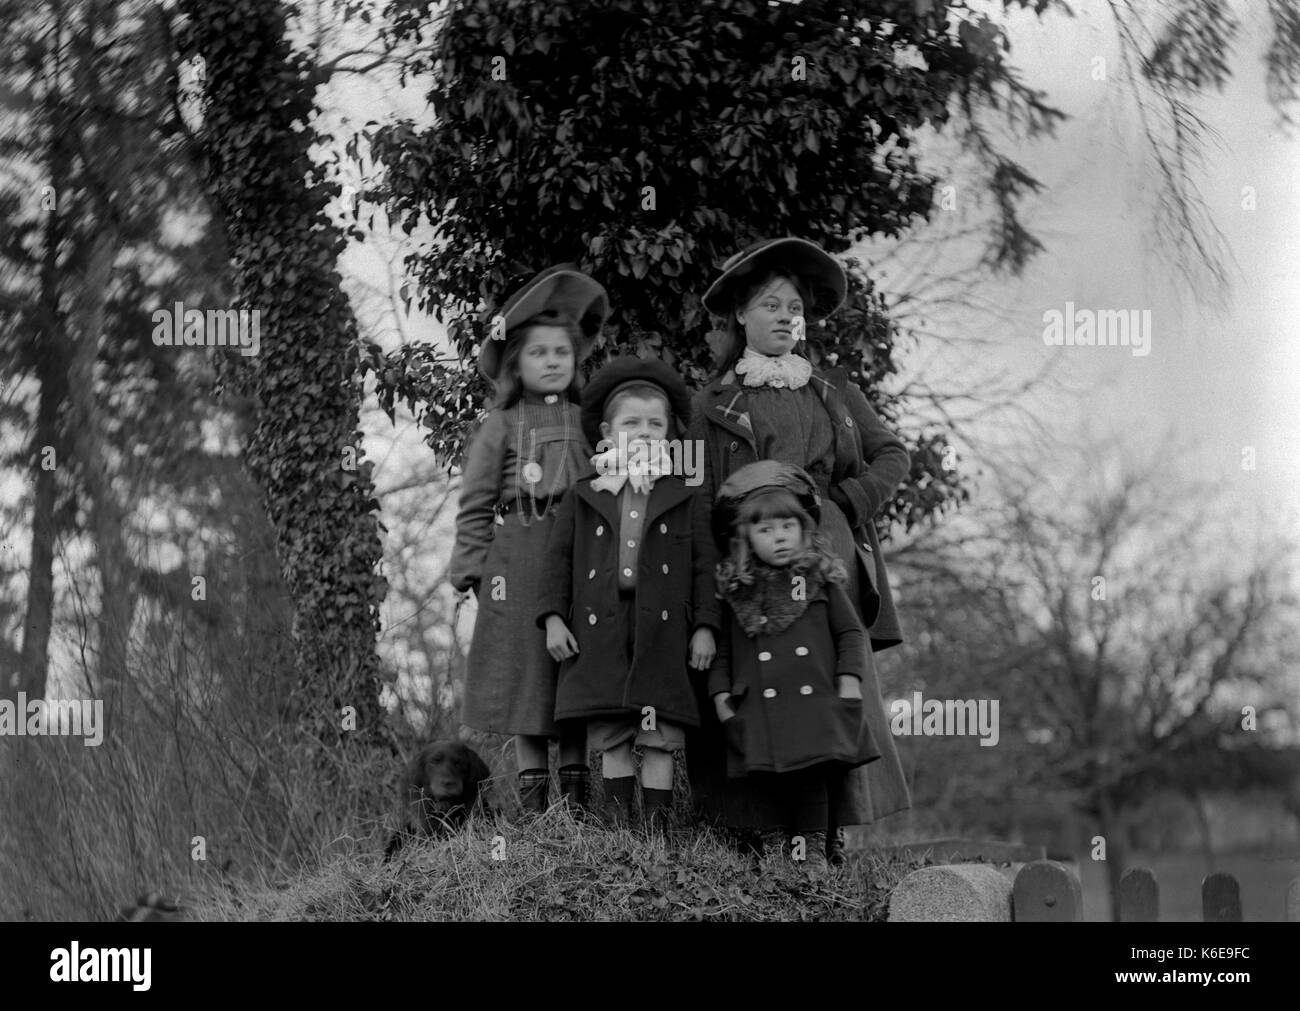 AJAXNETPHOTO. 1891-1910 (APPROX). SAINT-LO REGION, NORMANDY.FRANCE. - A GROUP OF CHILDREN IN LATE VICTORIAN OR EARLY EDWARDIAN DRESS POSE FOR THE CAMERA IN A COUNTRY SETTING. PHOTOGRAPHER:UNKNOWN © DIGITAL IMAGE COPYRIGHT AJAX VINTAGE PICTURE LIBRARY SOURCE: AJAX VINTAGE PICTURE LIBRARY COLLECTION REF:AVL FRA 1890 07 Stock Photo